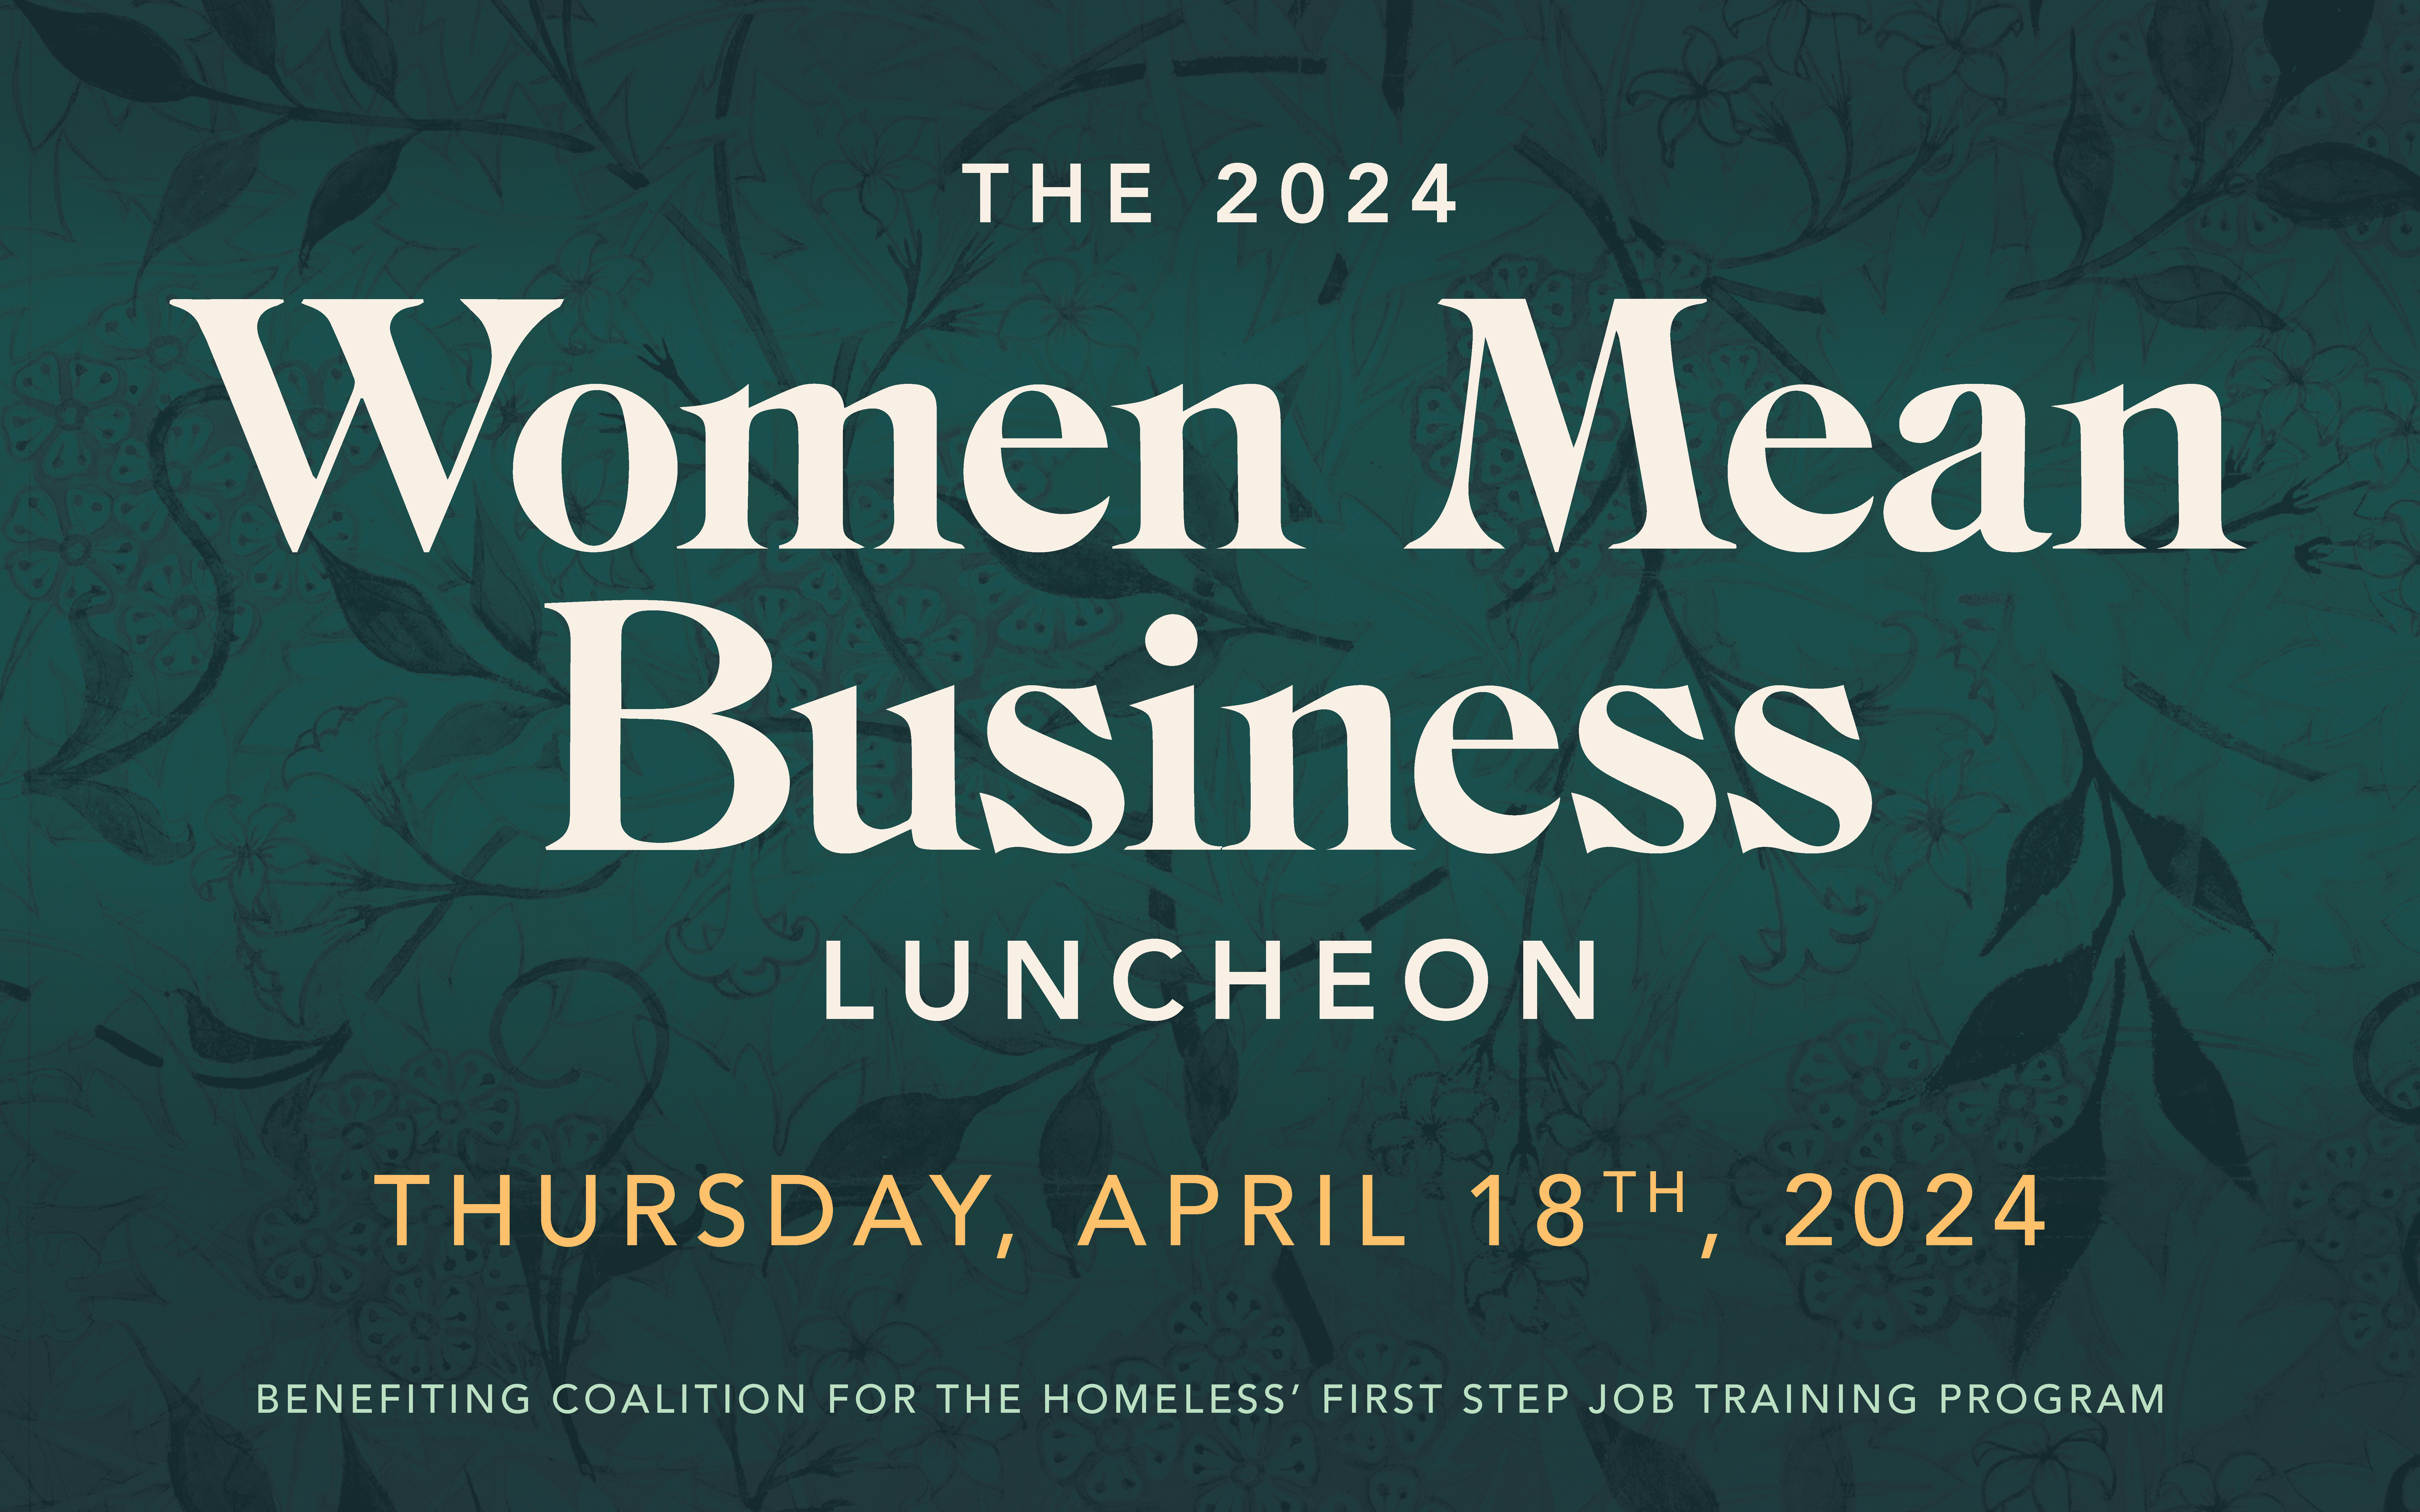 Women Who Mean Business Luncheon - Laguna Niguel Chamber of Commerce